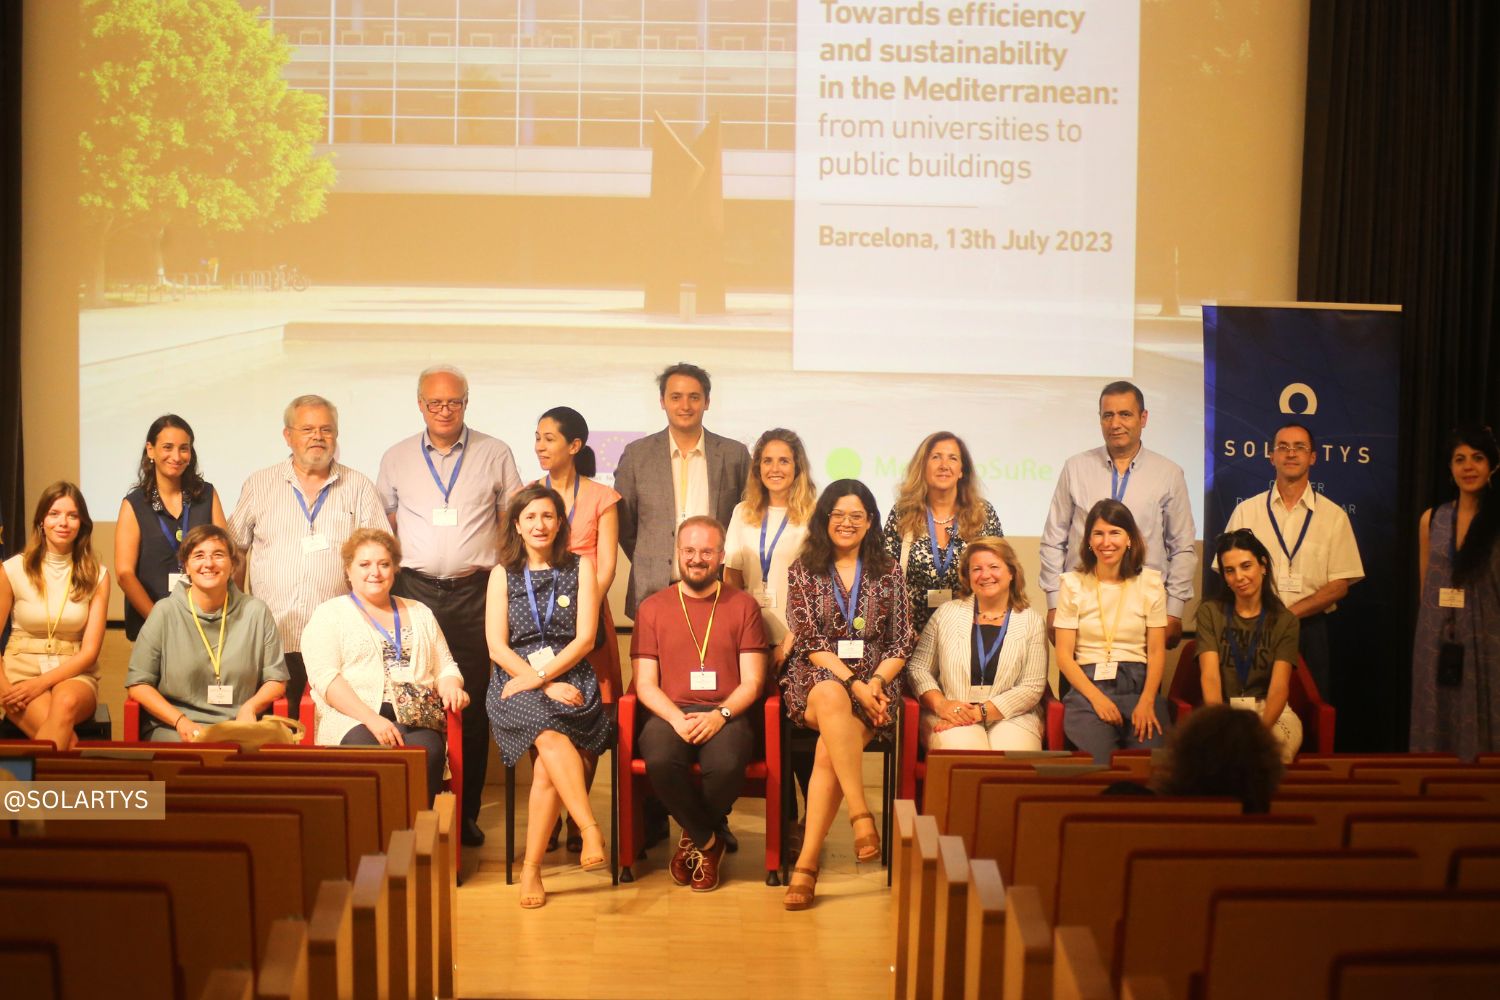 Med-EcoSuRe wrap up event highlights its innovative renovation process and breaks new grounds for sustainable buildings